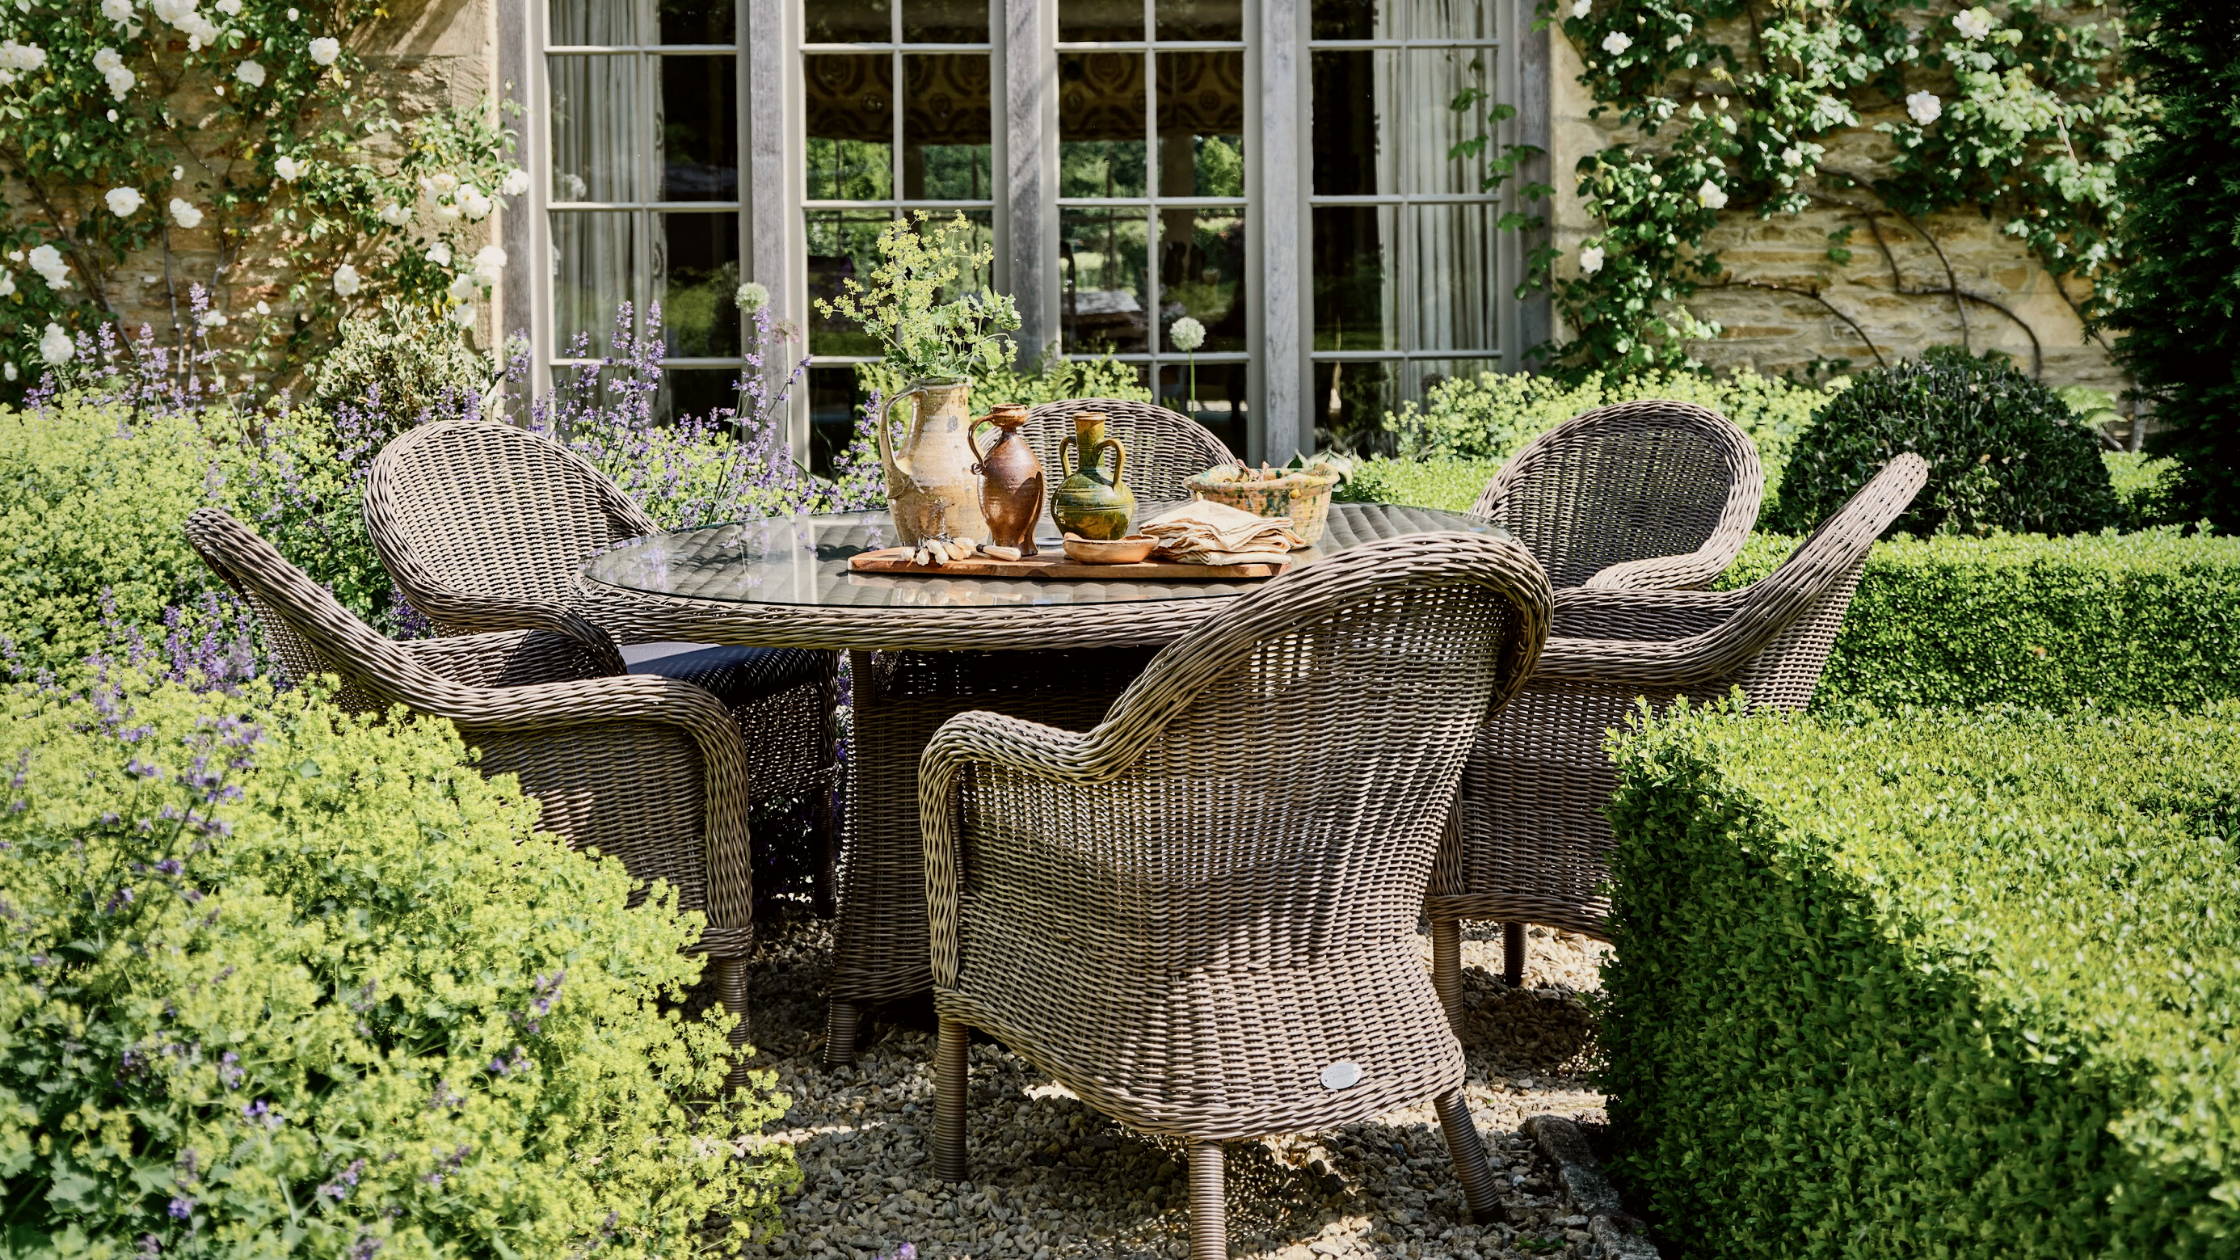 A beautiful rattan dining set surrounded by hedges and ivy sits on a shingled pathway in front of a large window.